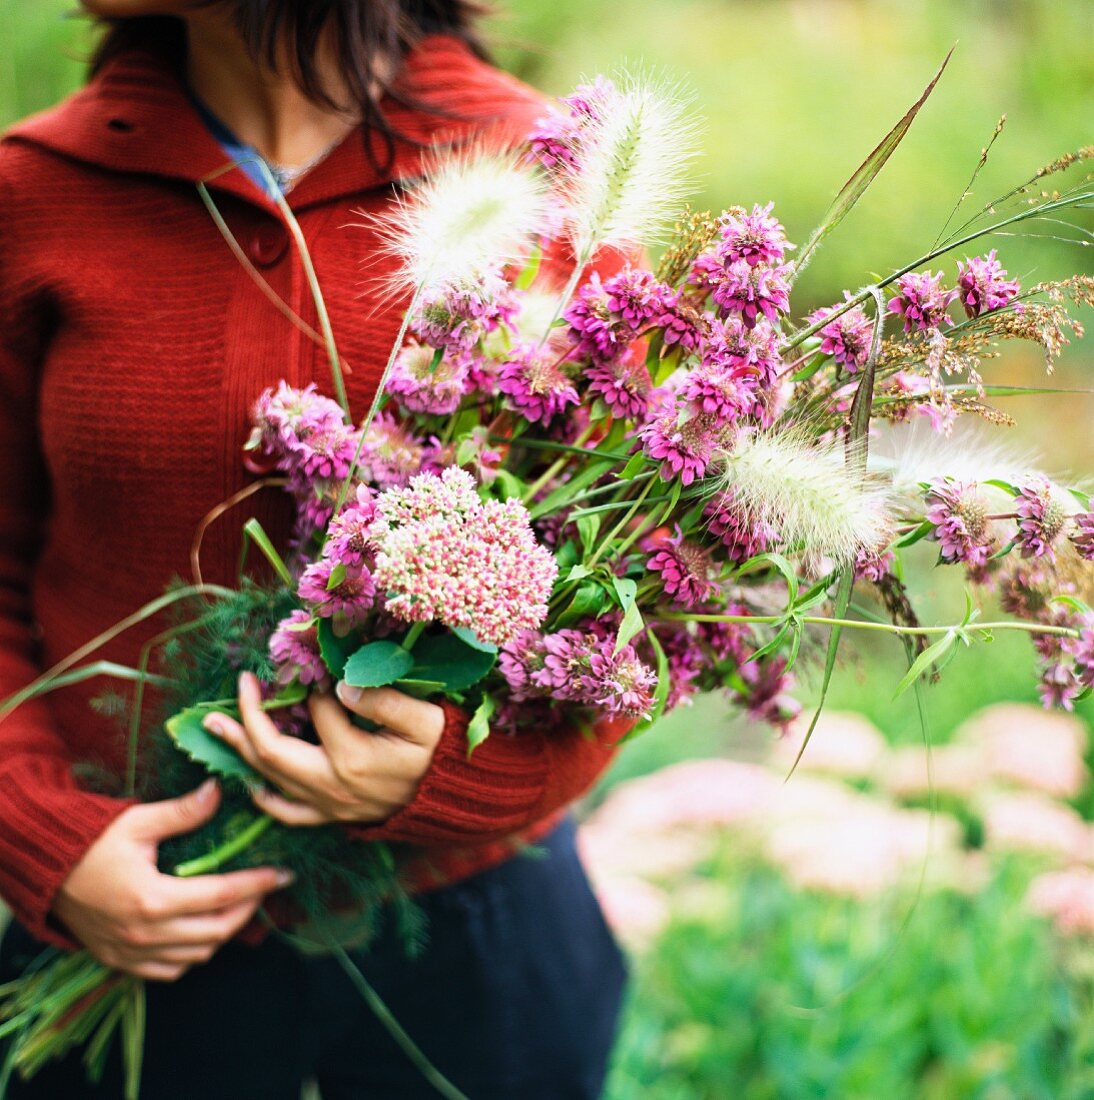 A woman holding a bouquet of purple flowers.